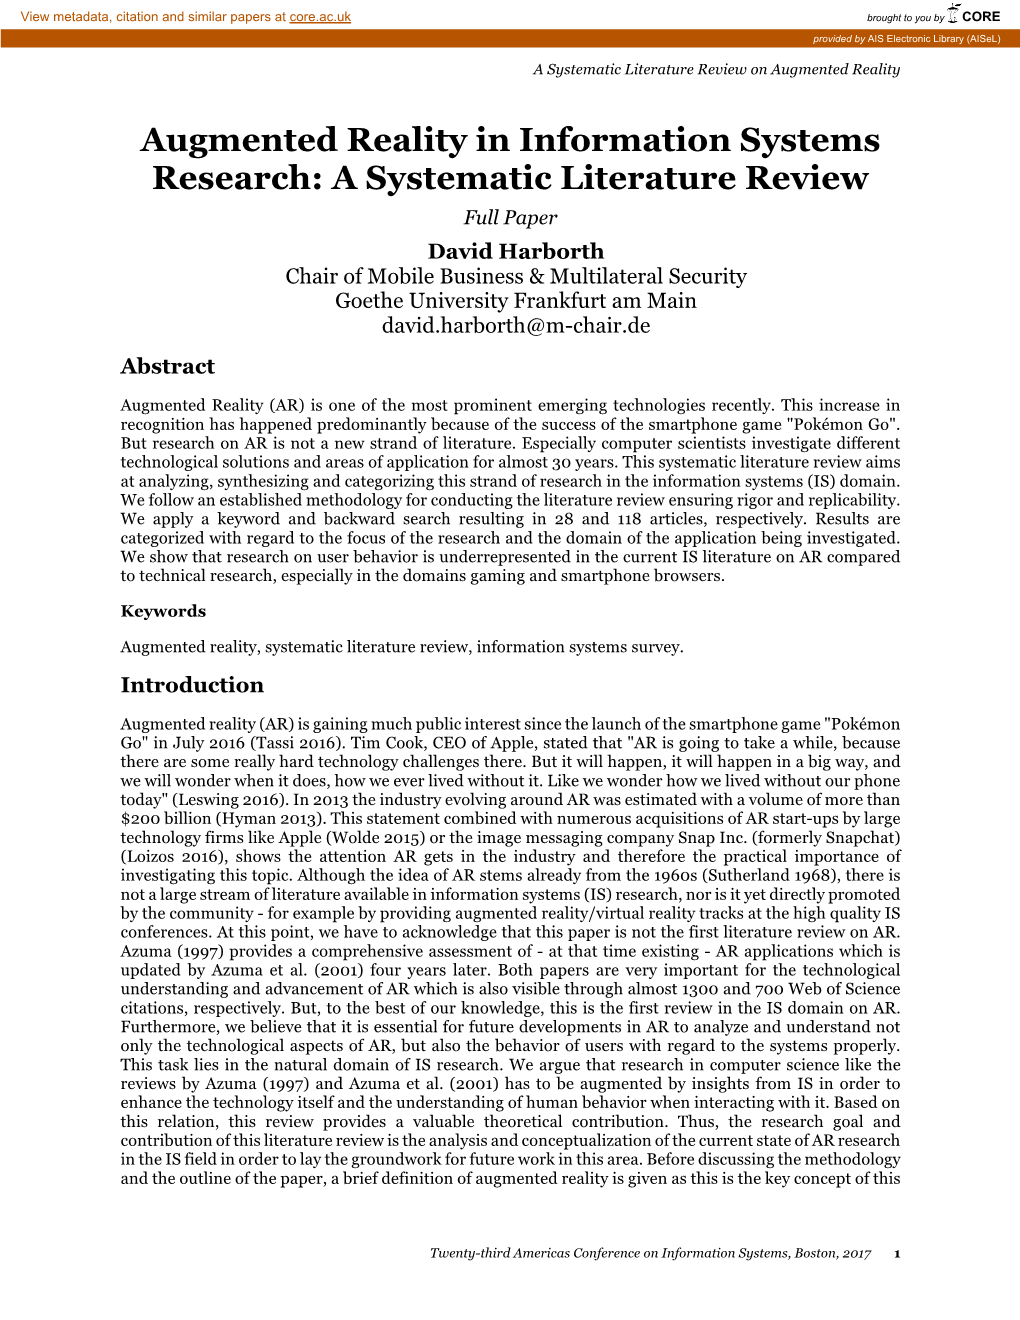 Augmented Reality in Information Systems Research: a Systematic Literature Review